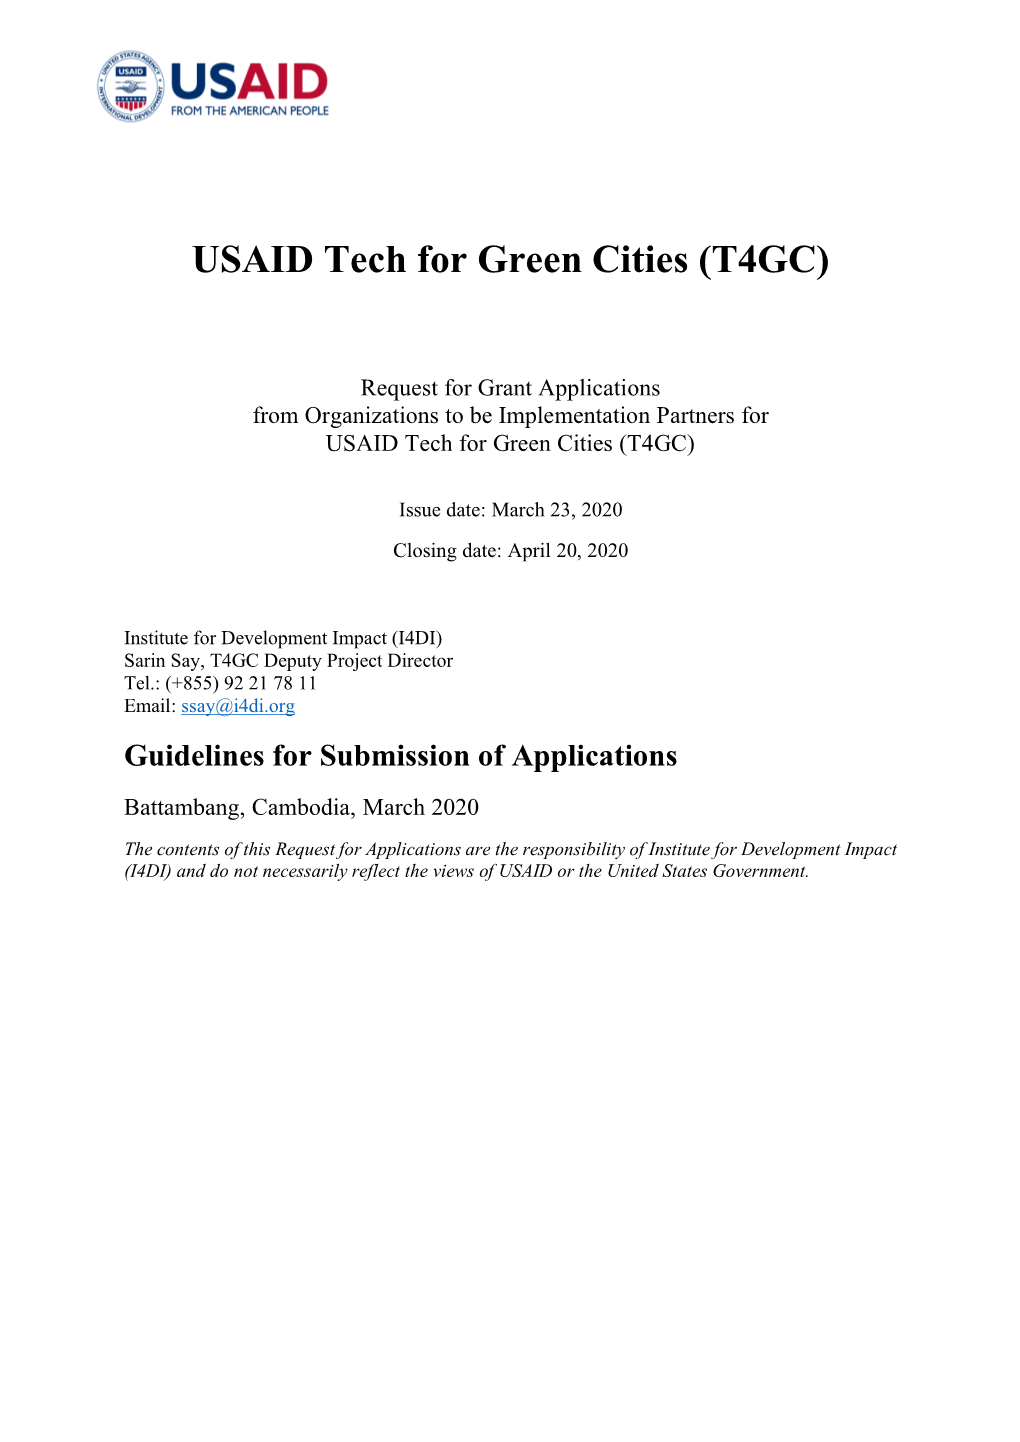 USAID Tech for Green Cities (T4GC)